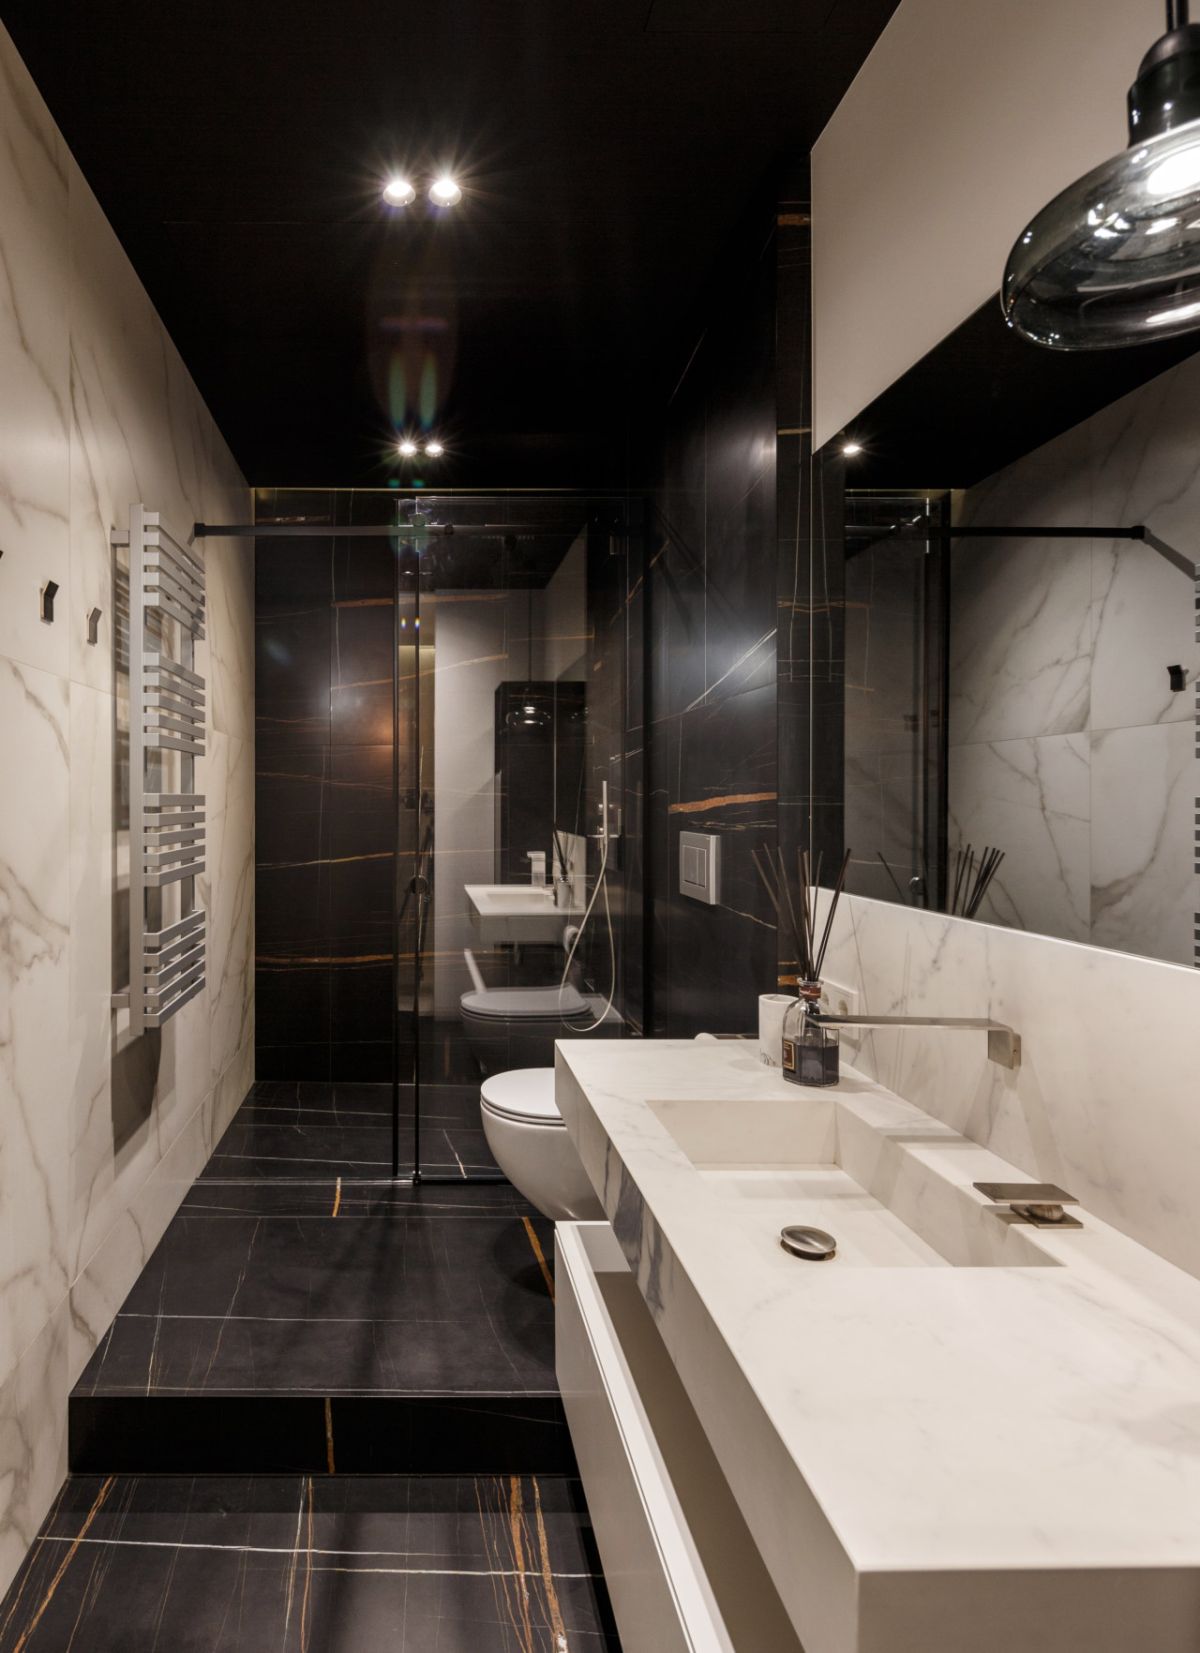 The second bathroom is clad with black marble and features a white marble sink and vanity in one